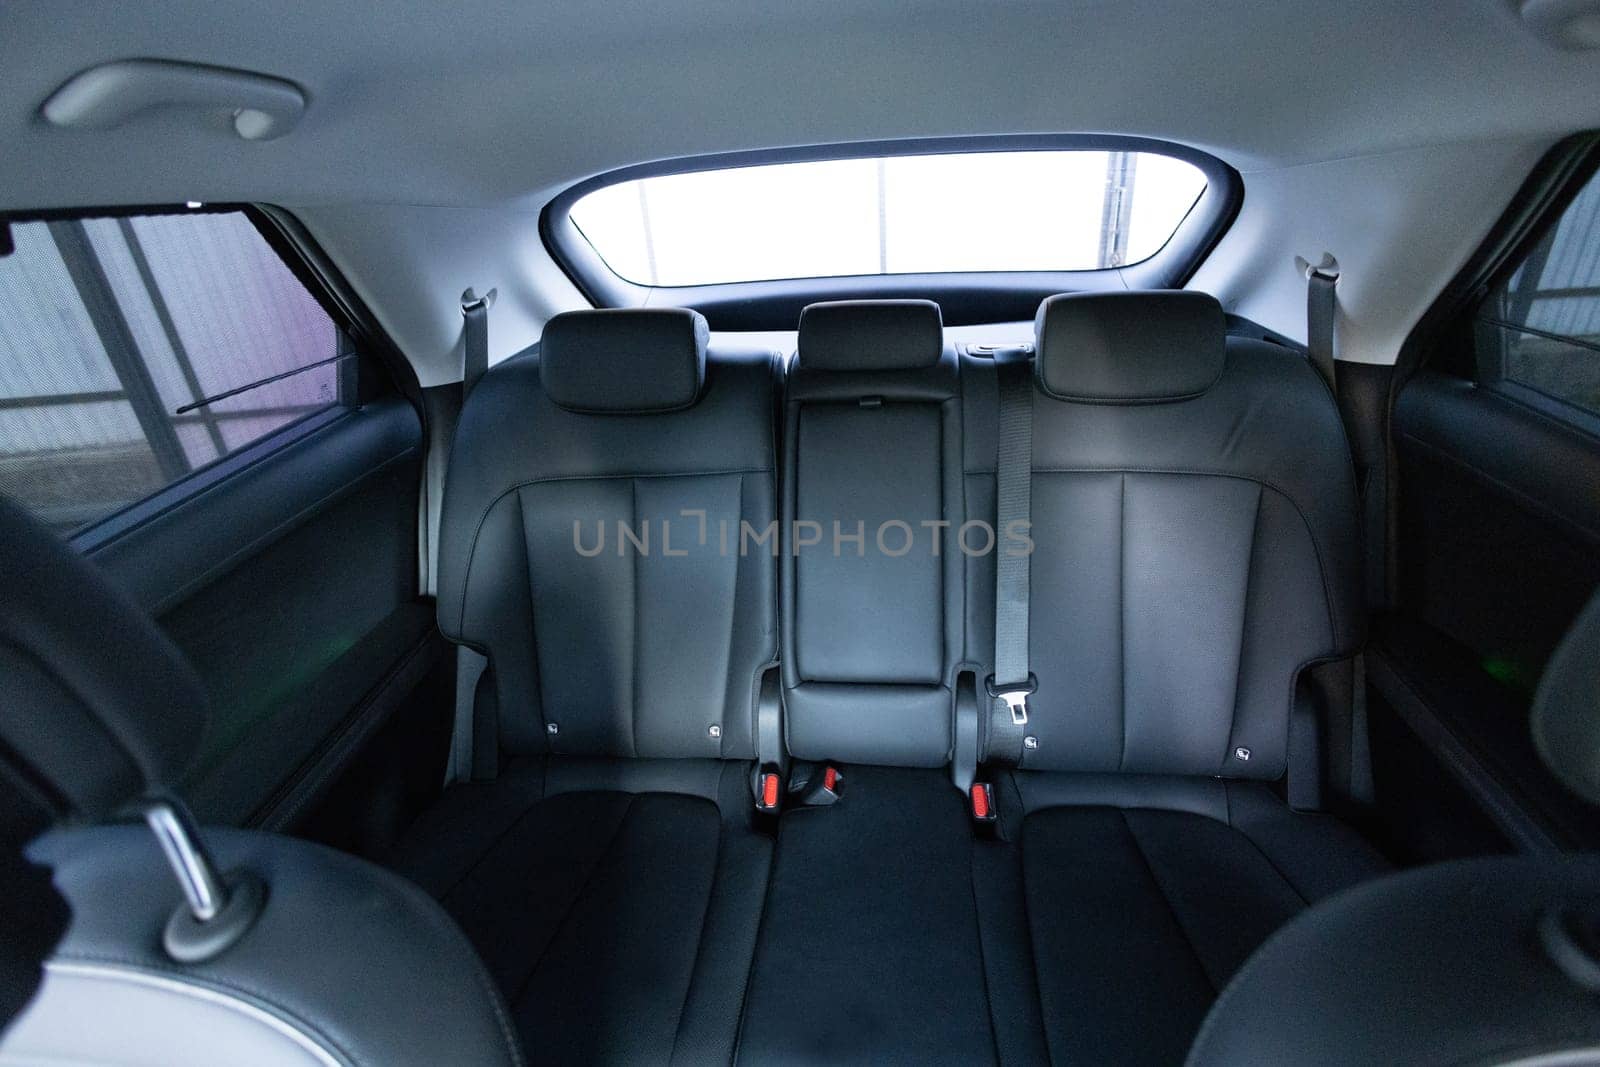 Luxury car rear leather seats row. Interior of new modern clean expensive car. Passenger seats with leather. Closeup details. New electric car inside. Car cleaning theme by uflypro